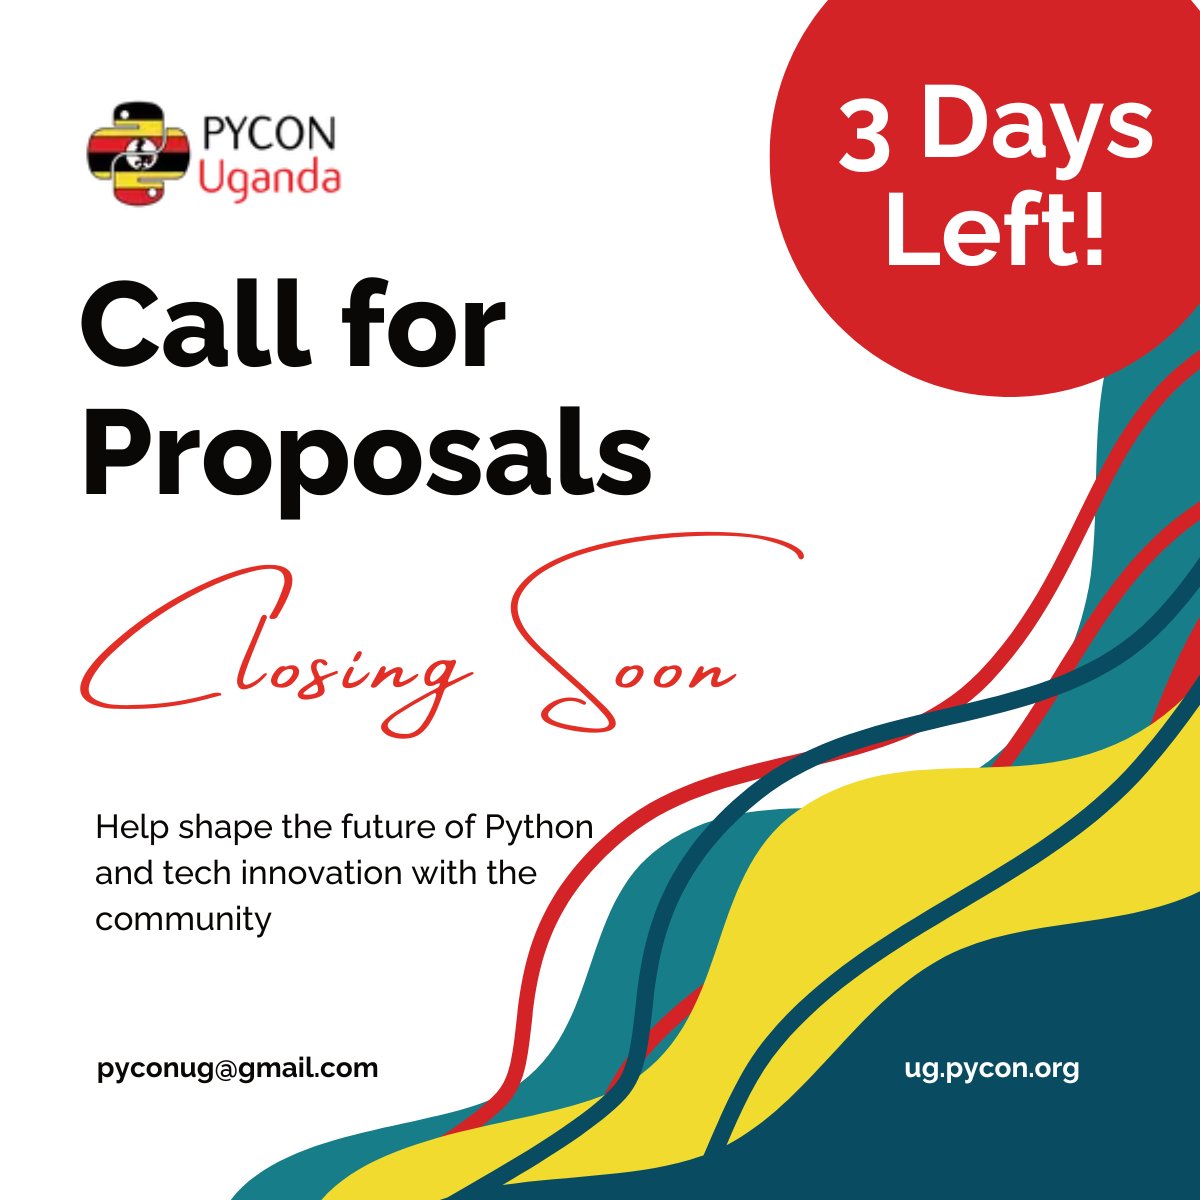 📢 Only 3 days to go! This is your chance to contribute to the Python community and share your knowledge at PyCon Uganda. Submit your proposal today:  papercall.io/pyconug

#PyConUganda #TechTalk
#PyConUganda2024